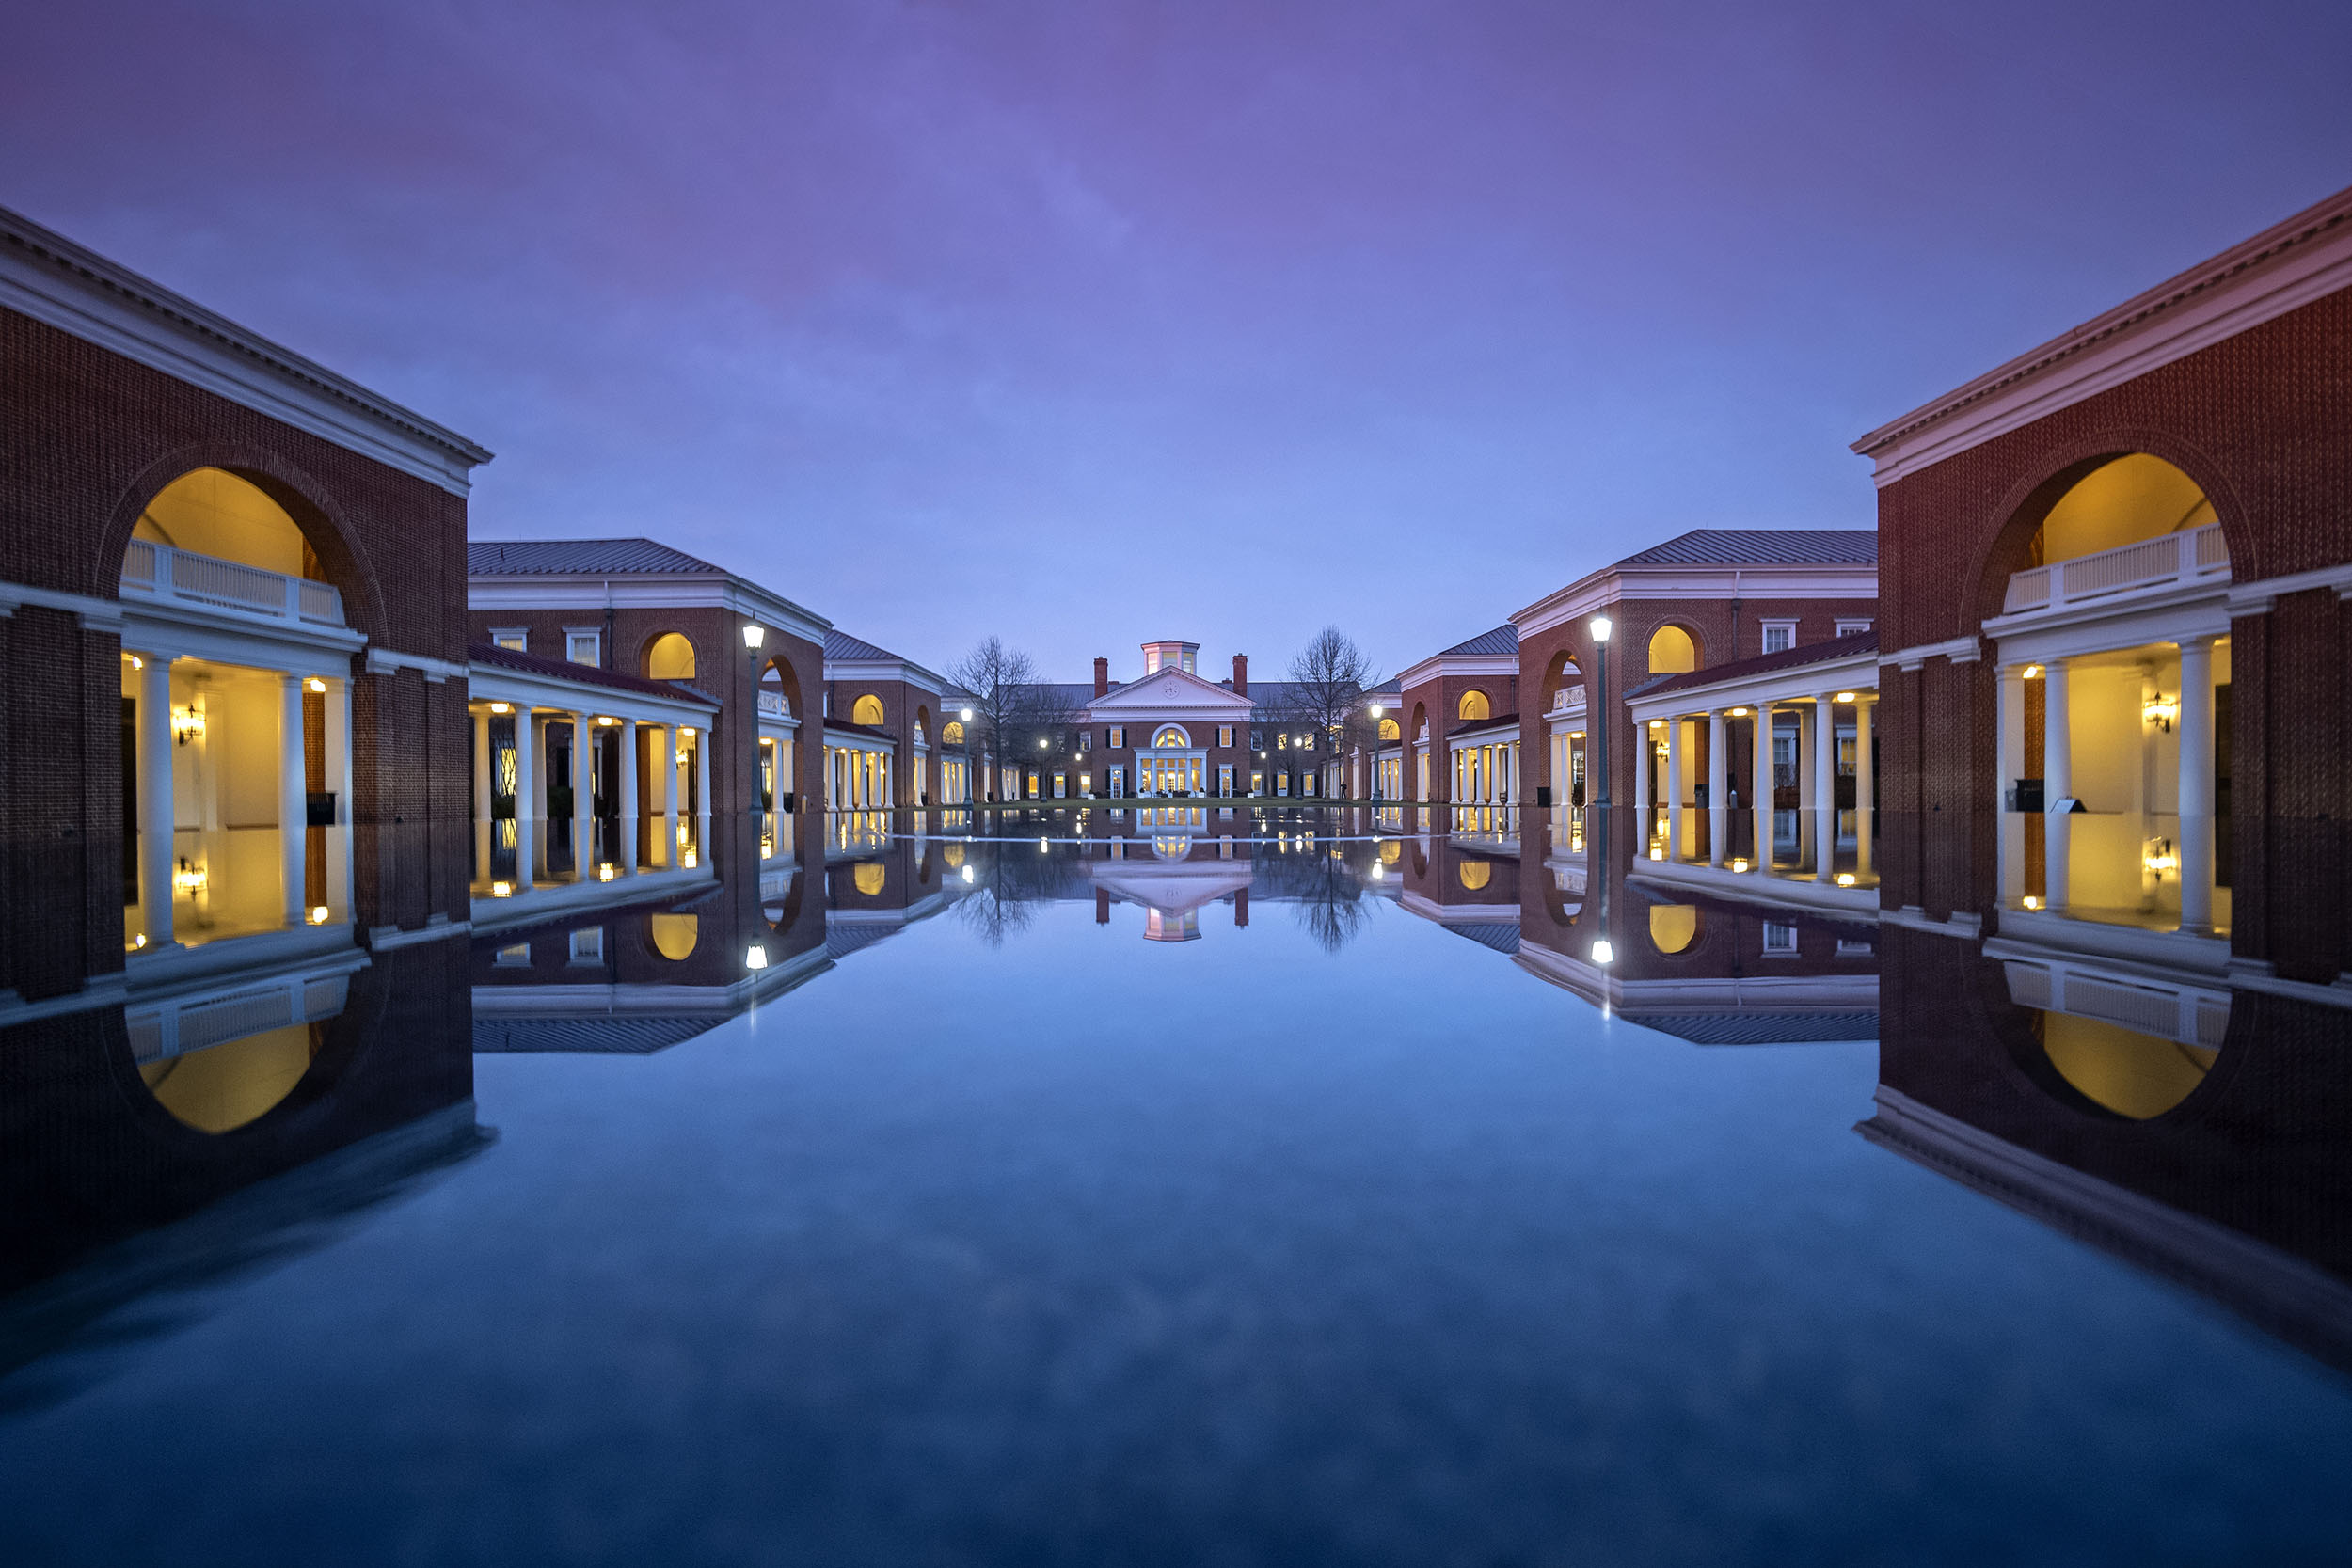 Reflection pond at Darden at dusk with the lights and building reflecting off of the water